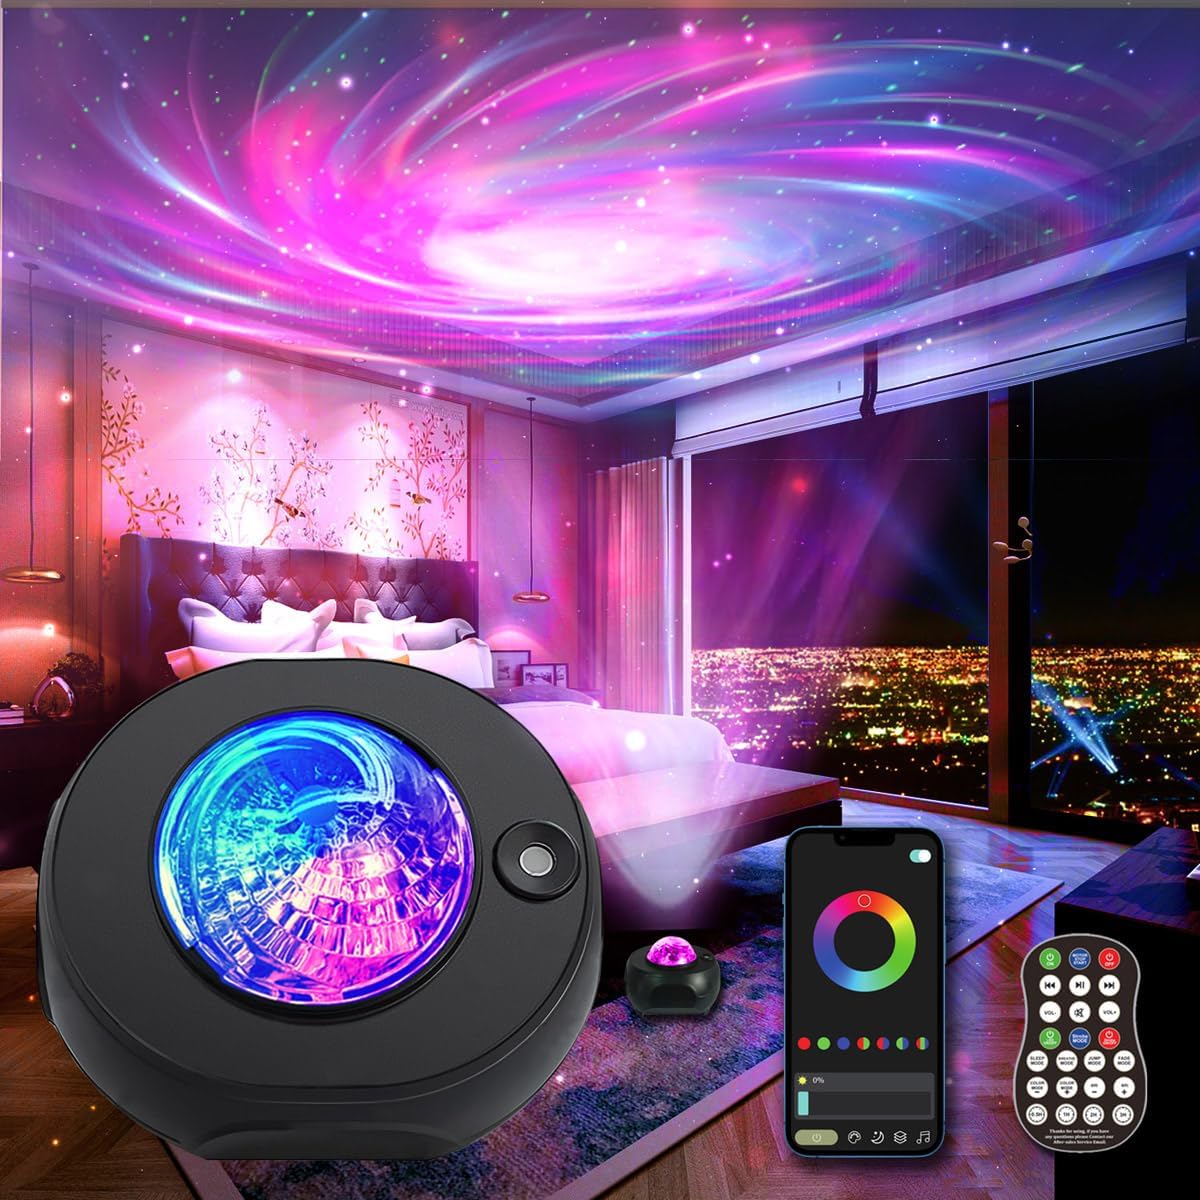 Galaxy Projector Ceiling Decor Star Light Projector Psychedelic Swirling Bedroom Decor for Teen Girls,Smart Skylight with Bluetooth Music Speaker, APP Control (Black Hole)